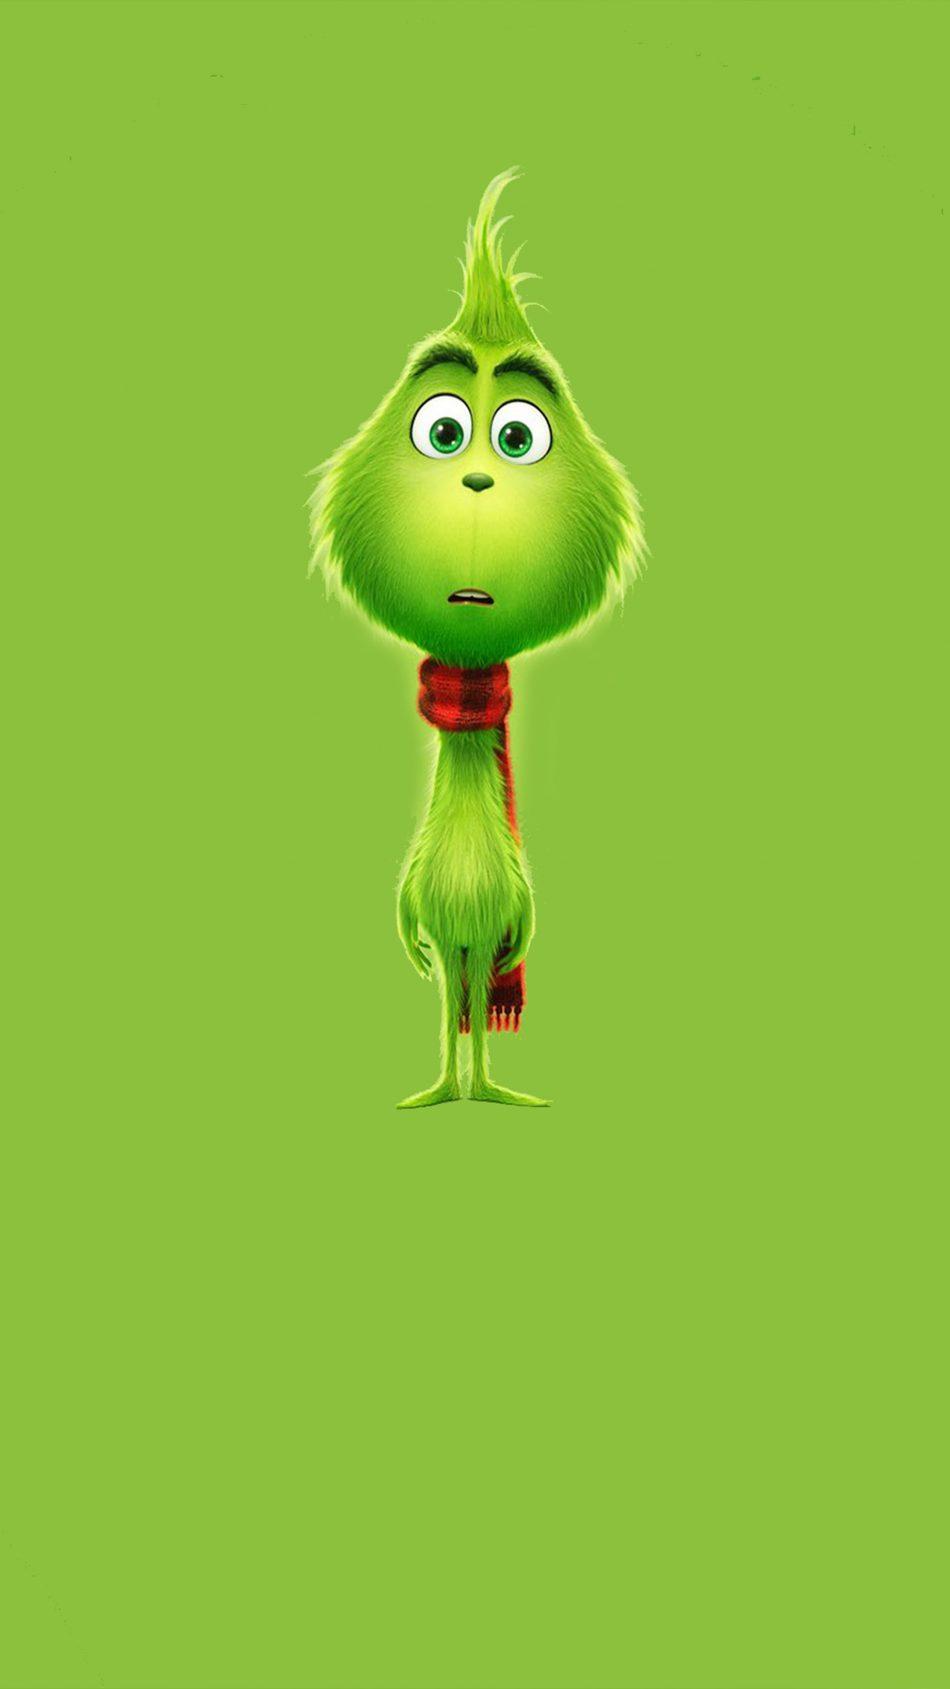 Download The Grinch Movie 2018 Free Pure 4K Ultra HD Mobile